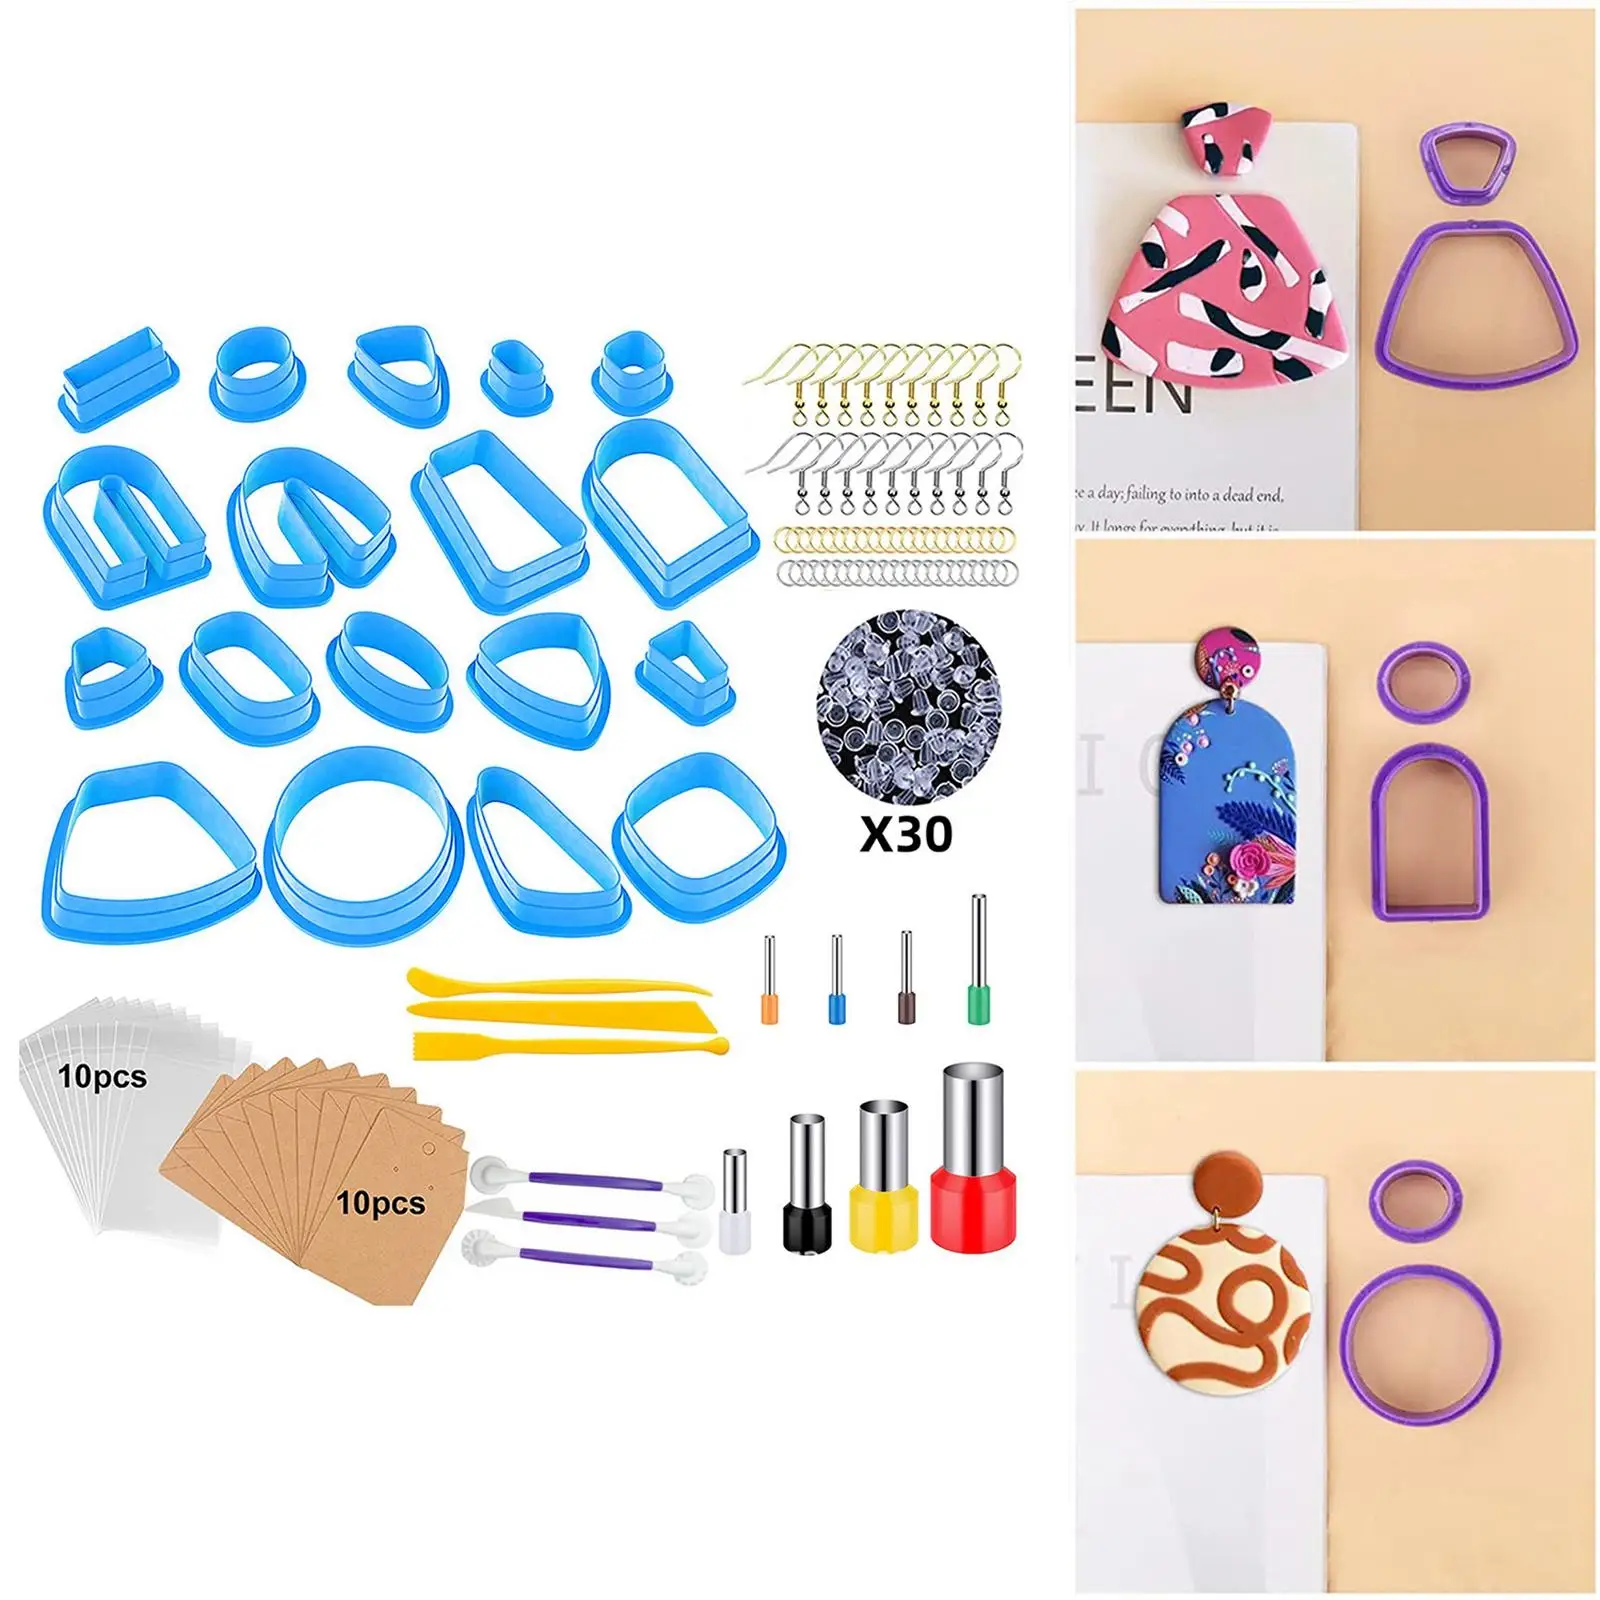 Polymer Clay , 18 Pcs Clay Earring with Earring Cards and Hooks, Tools, Earring Backs, Jump Rings for Clay Earring Making